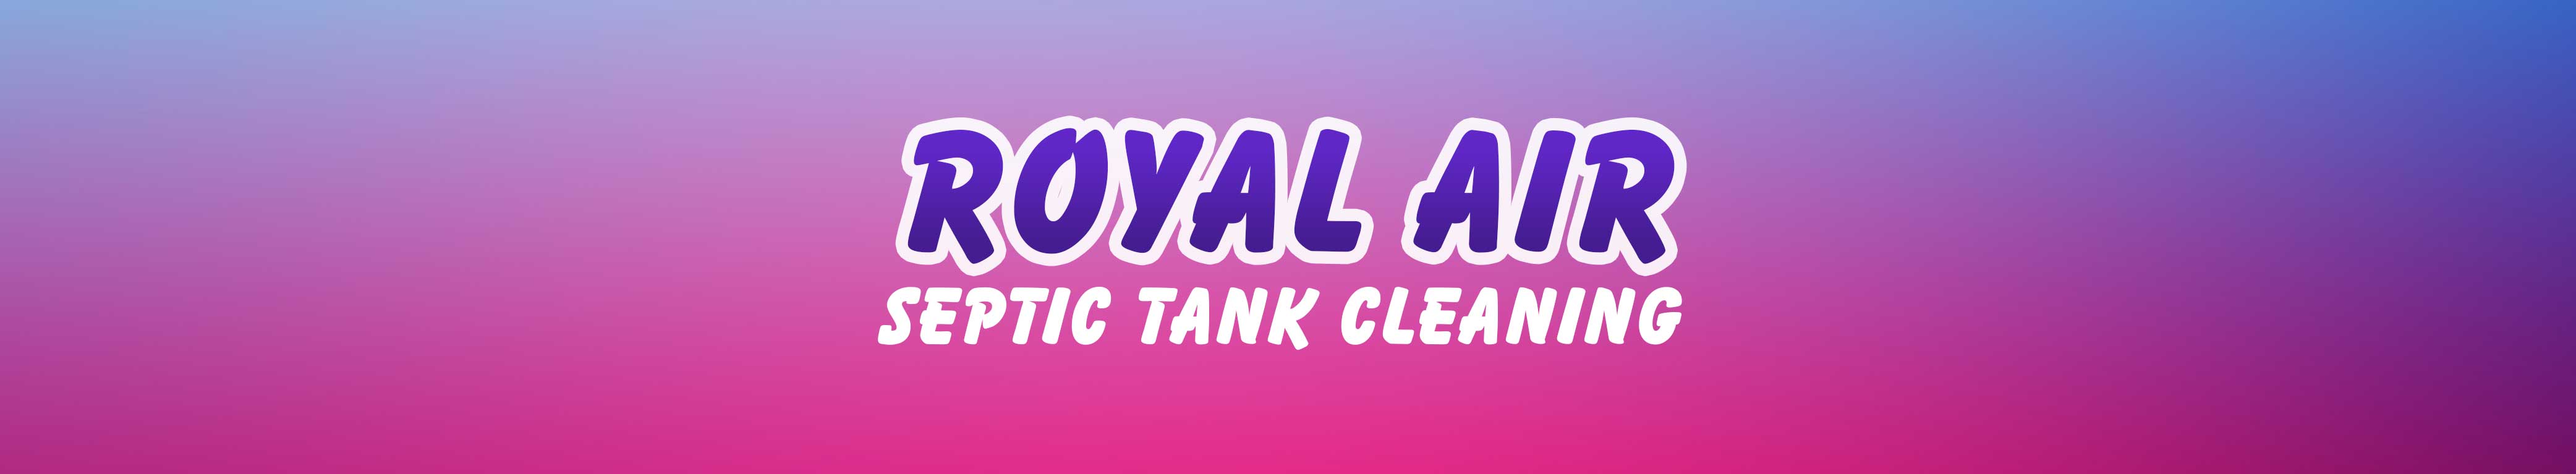 Royal Air Septic Tank Cleaning Banner Image